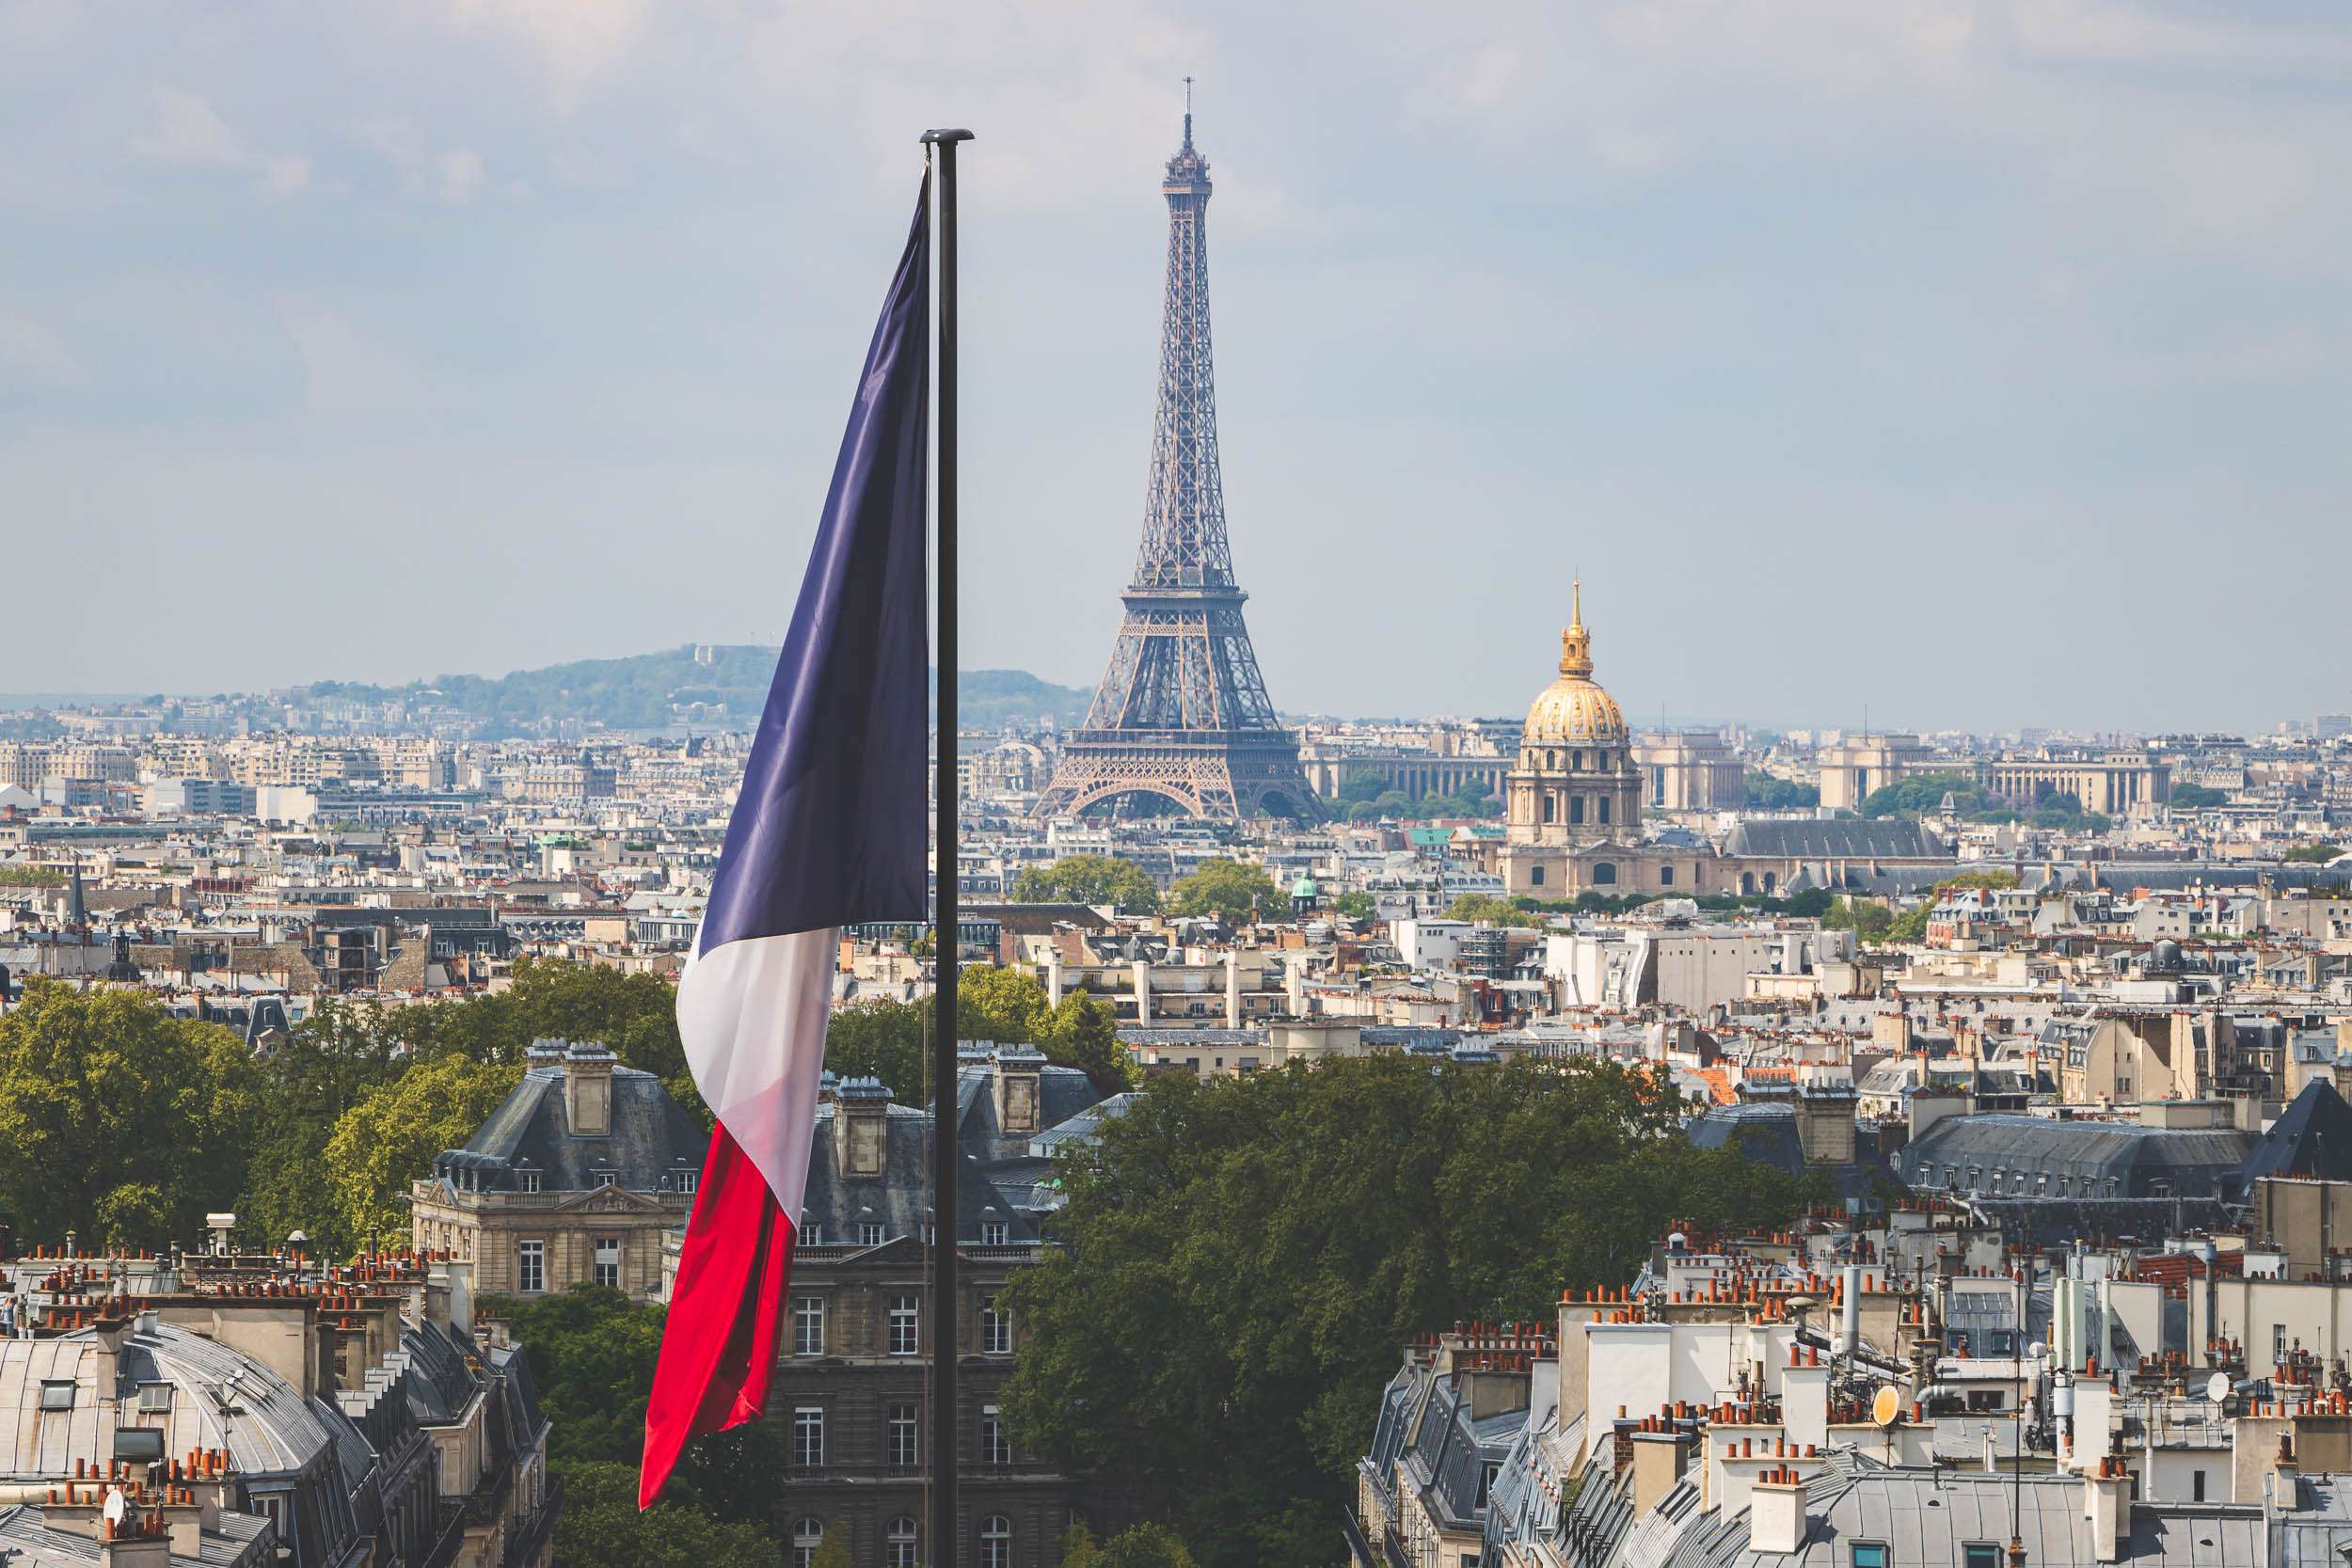 A photo of the Paris skyline from a rooftop with the French Tricolor flag standing next to the Eiffel Tower in the distance